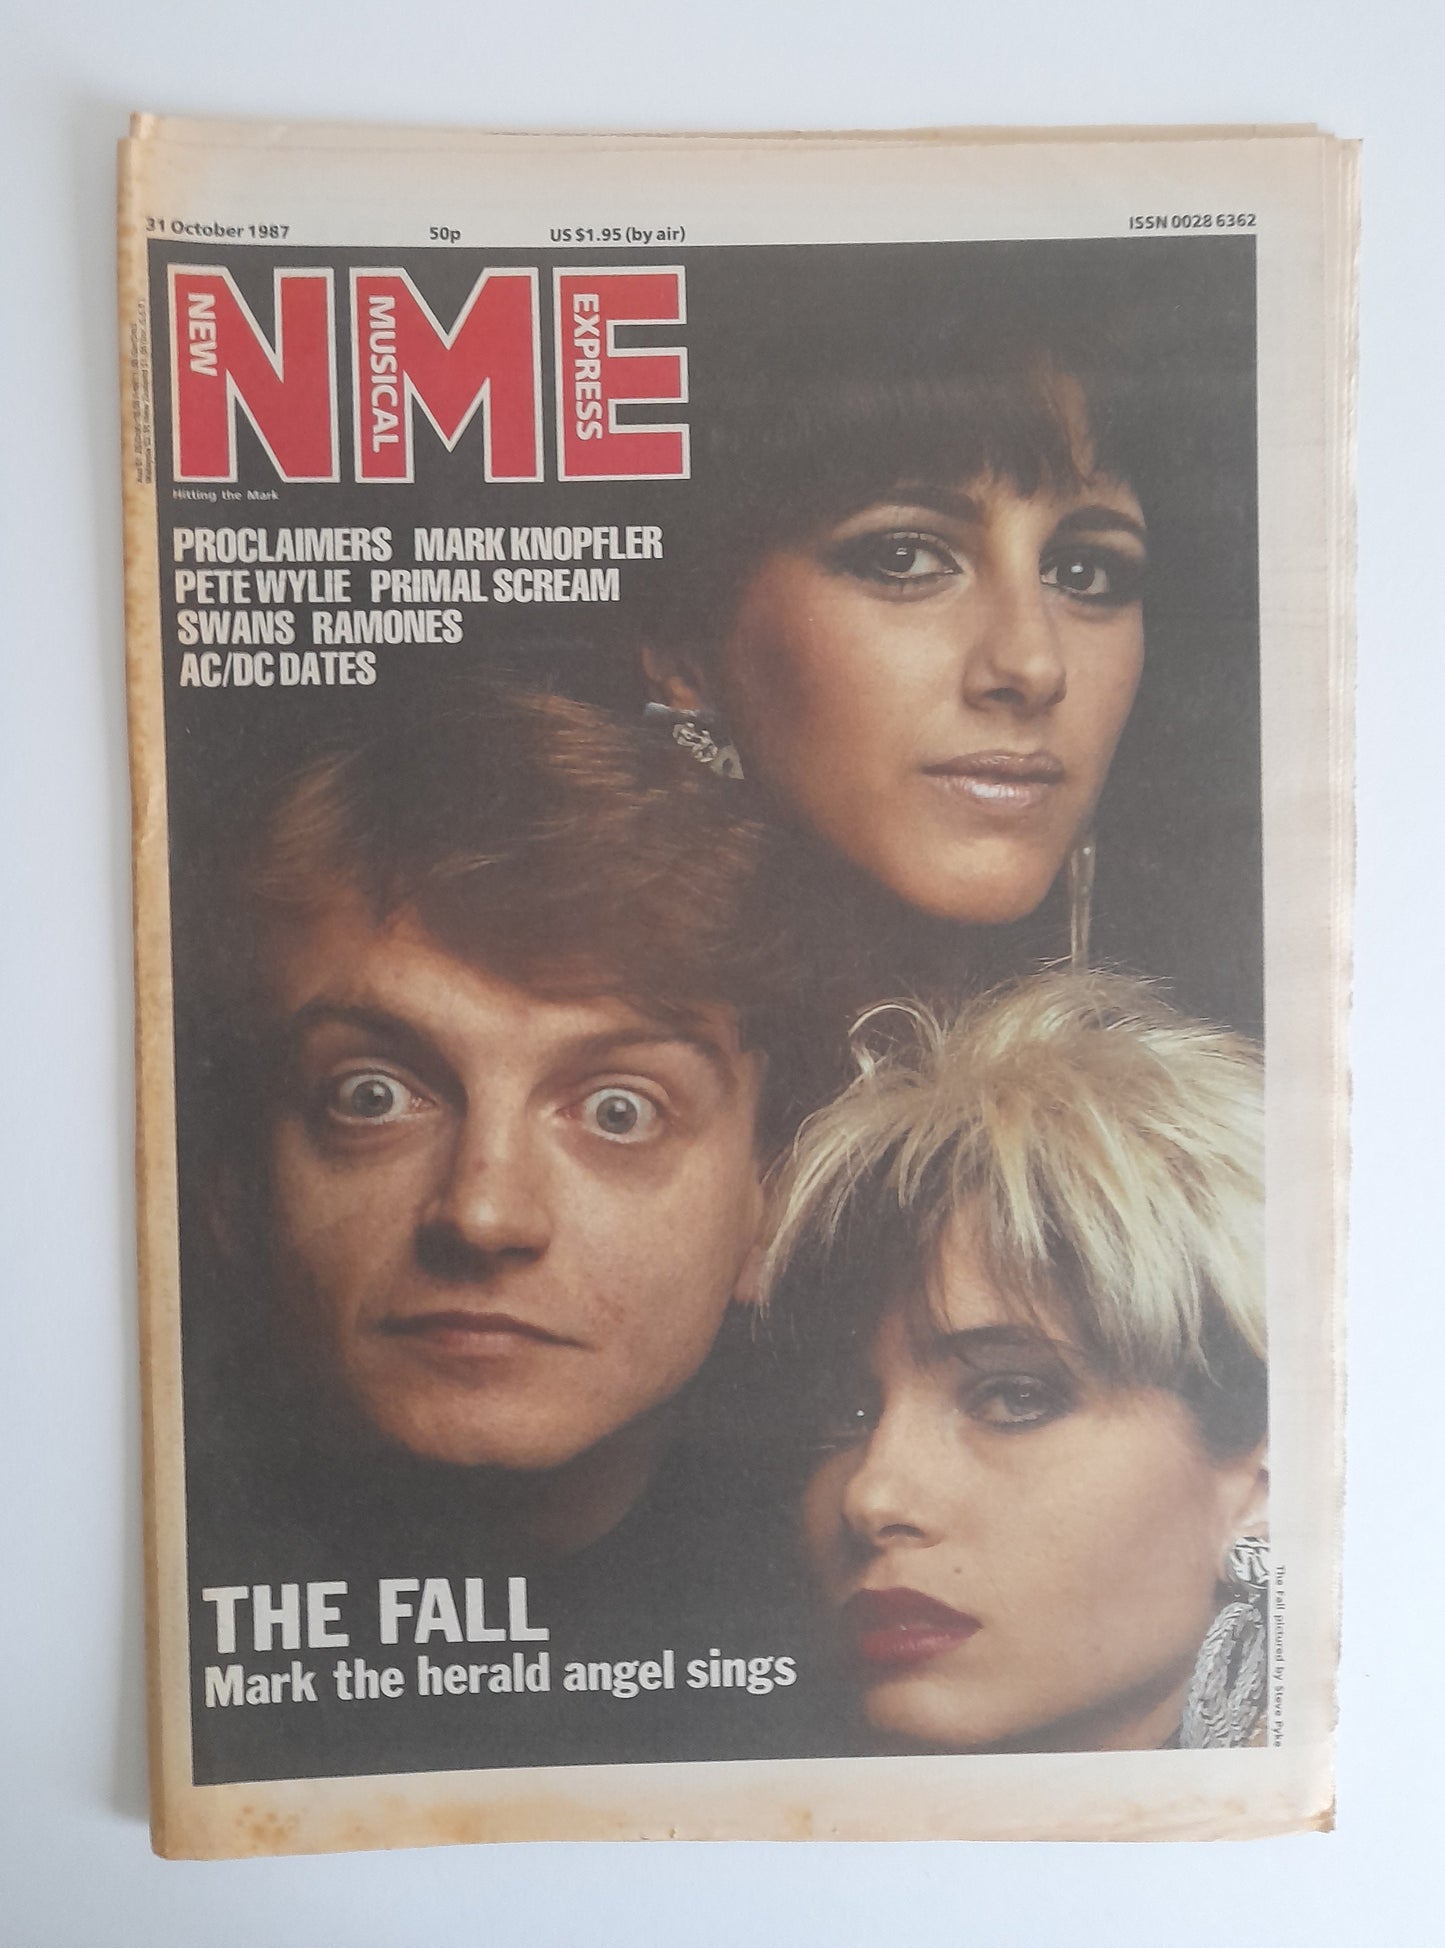 NME Magazine 31st October 1987 The Fall, Proclaimers, Mark Knopfler